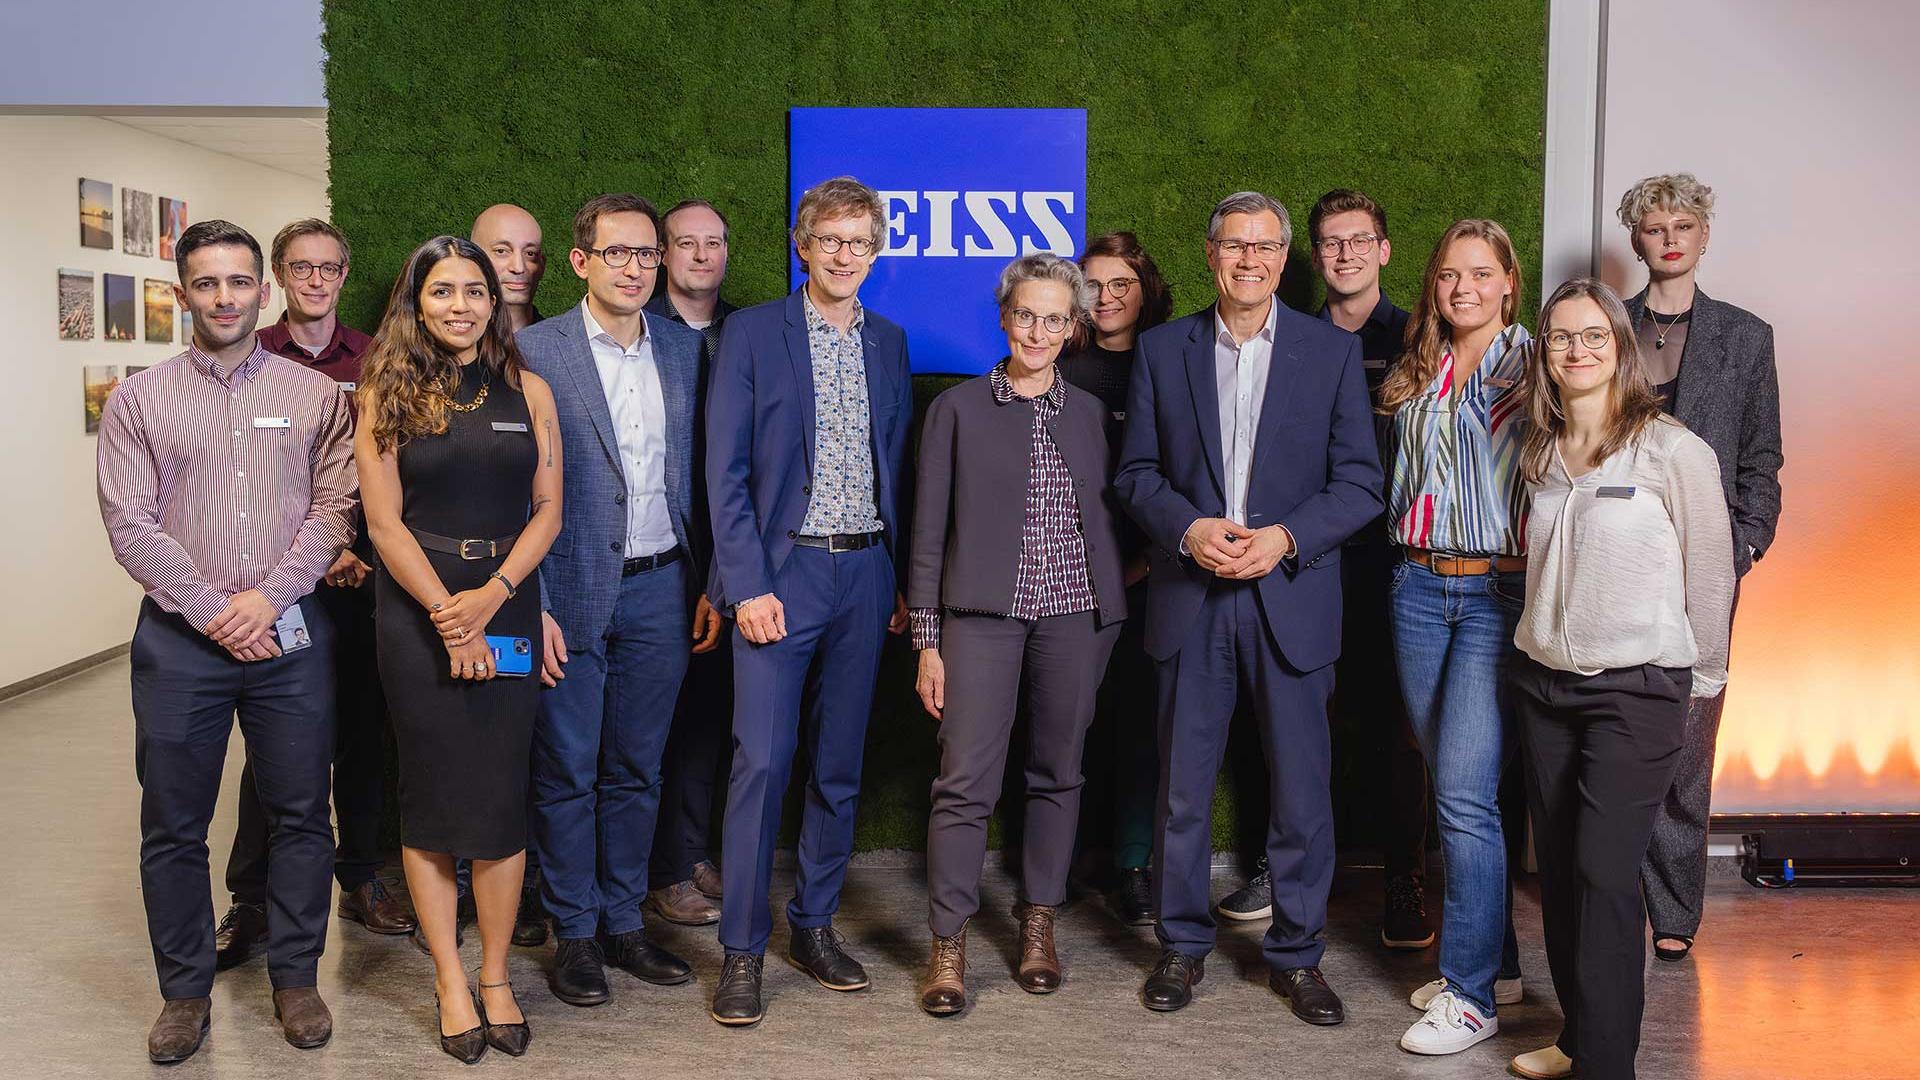 In addition to the ZEISS Executive Board and ZEISS employees, guests from industry and science were invited to the opening ceremony in Dresden.